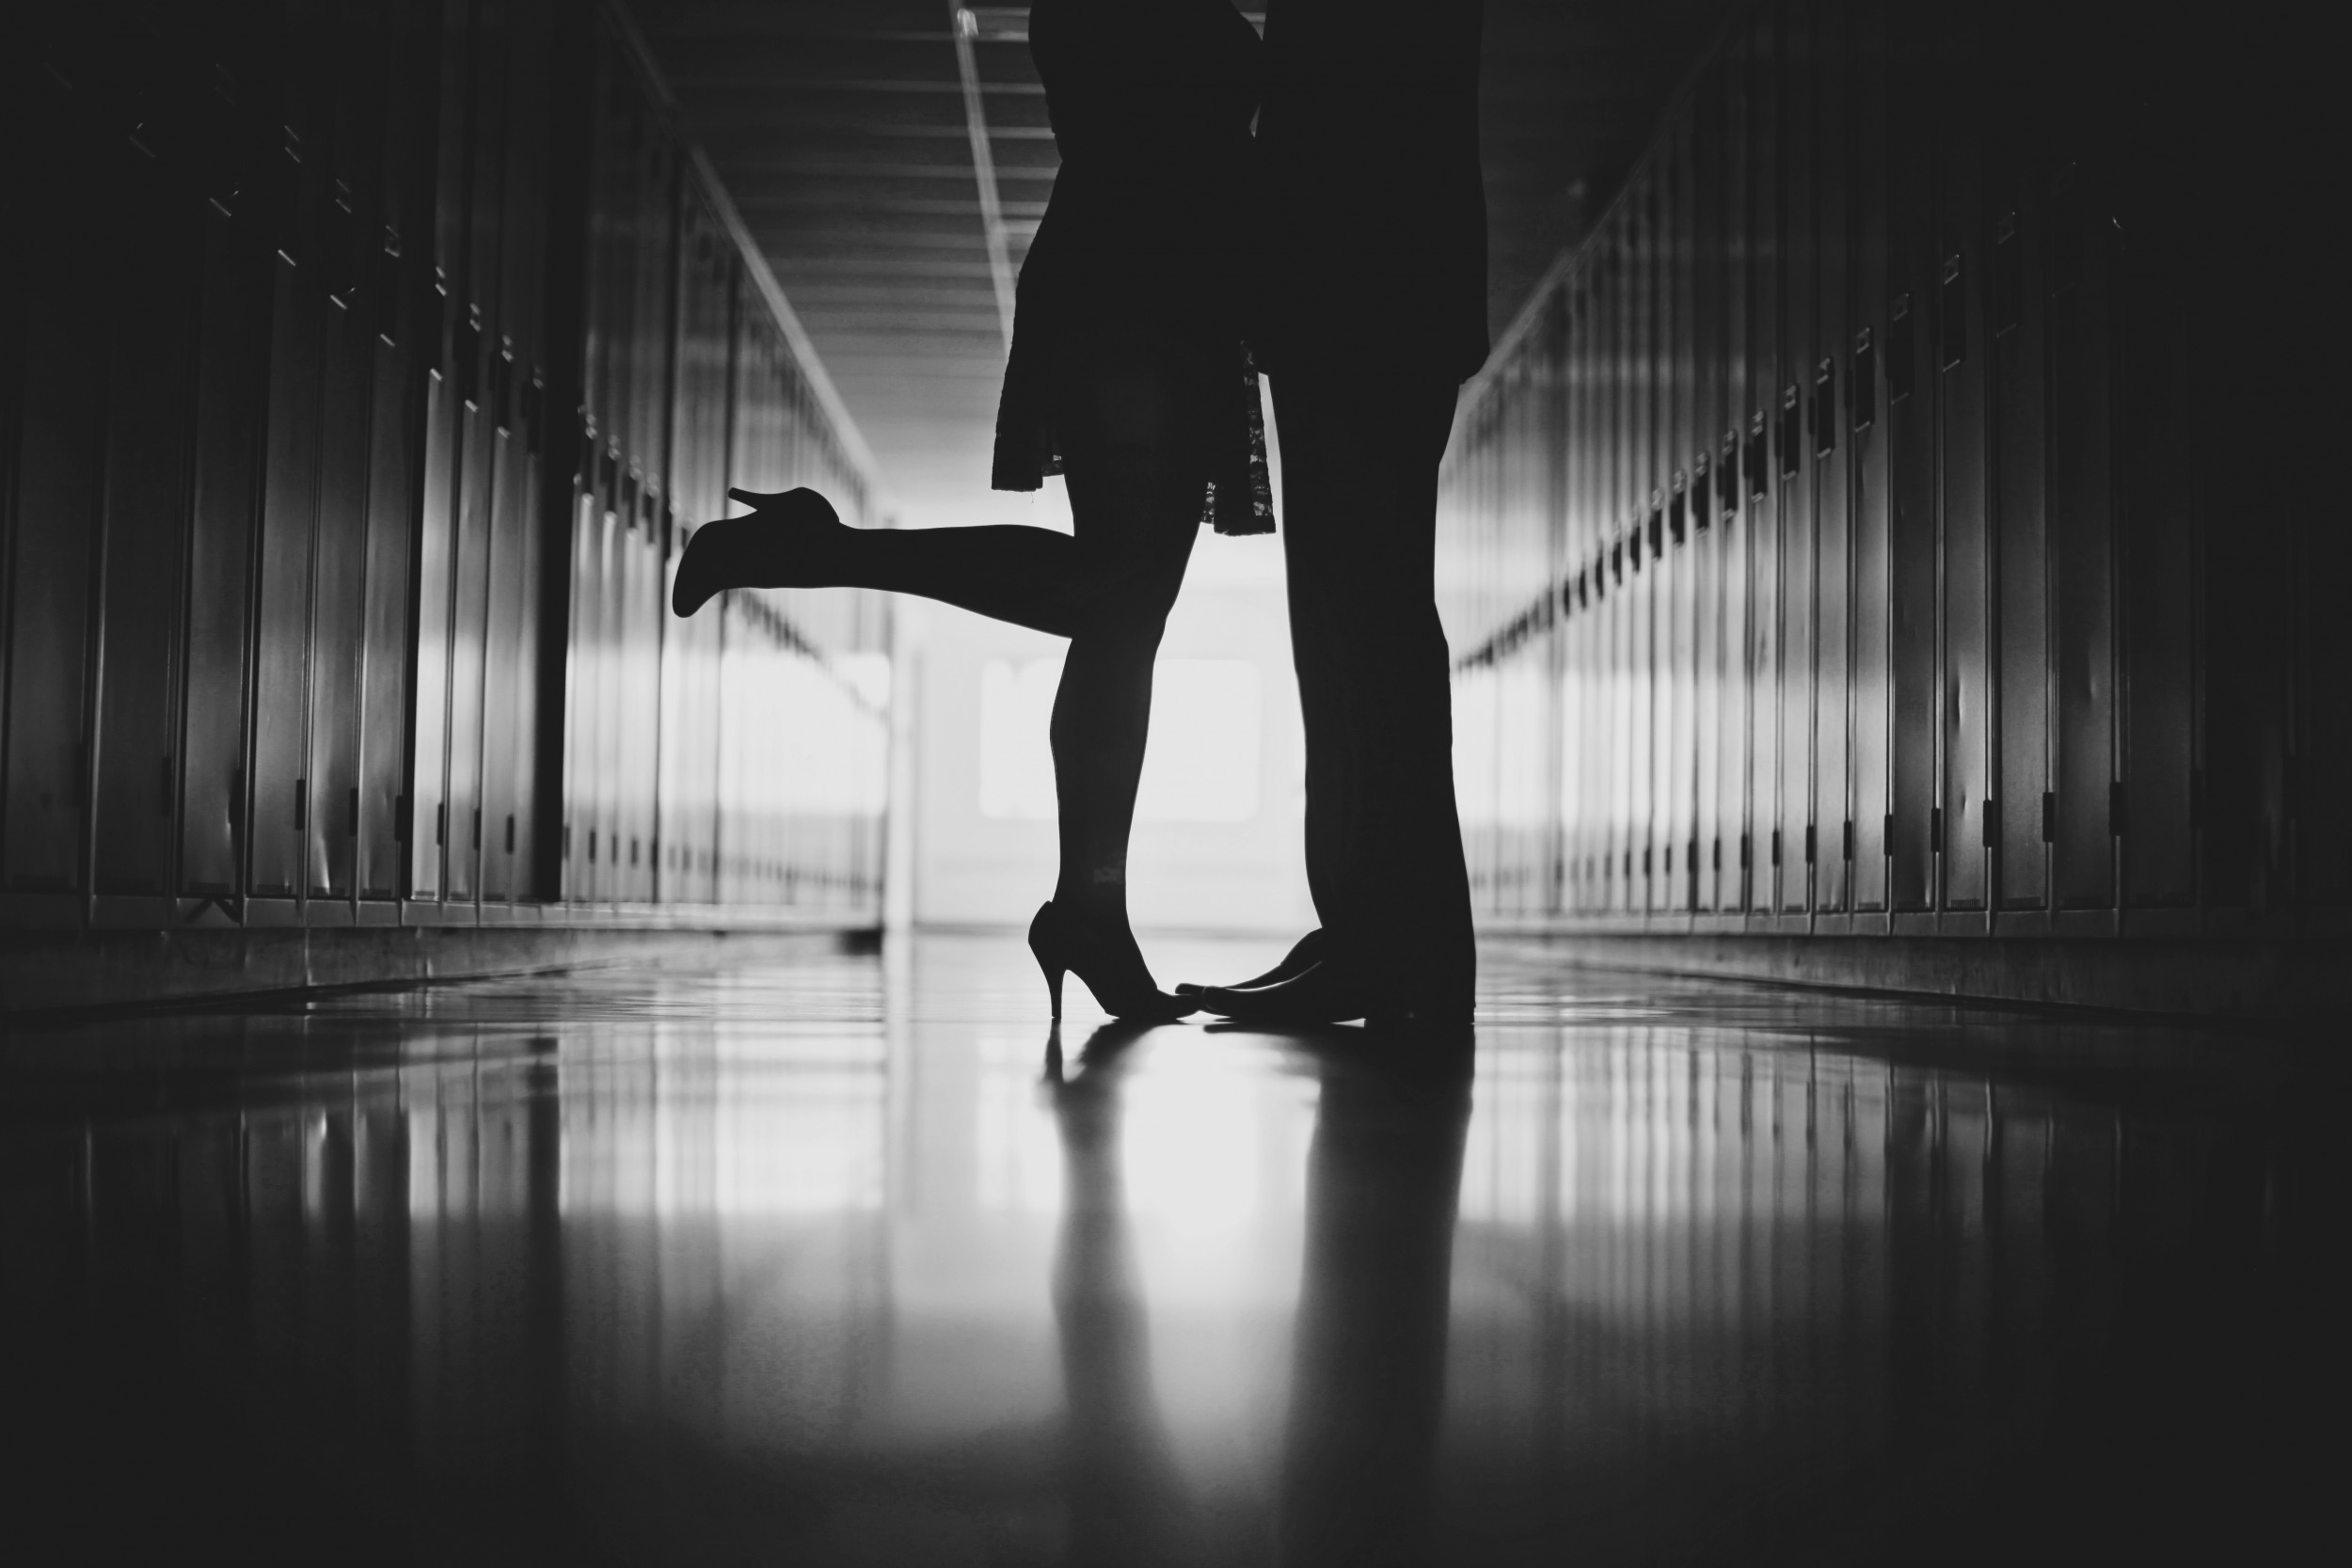 School Sexvideos Com - Video Shows Students Having Sex in Maryland Classroom, School and Police  Investigate